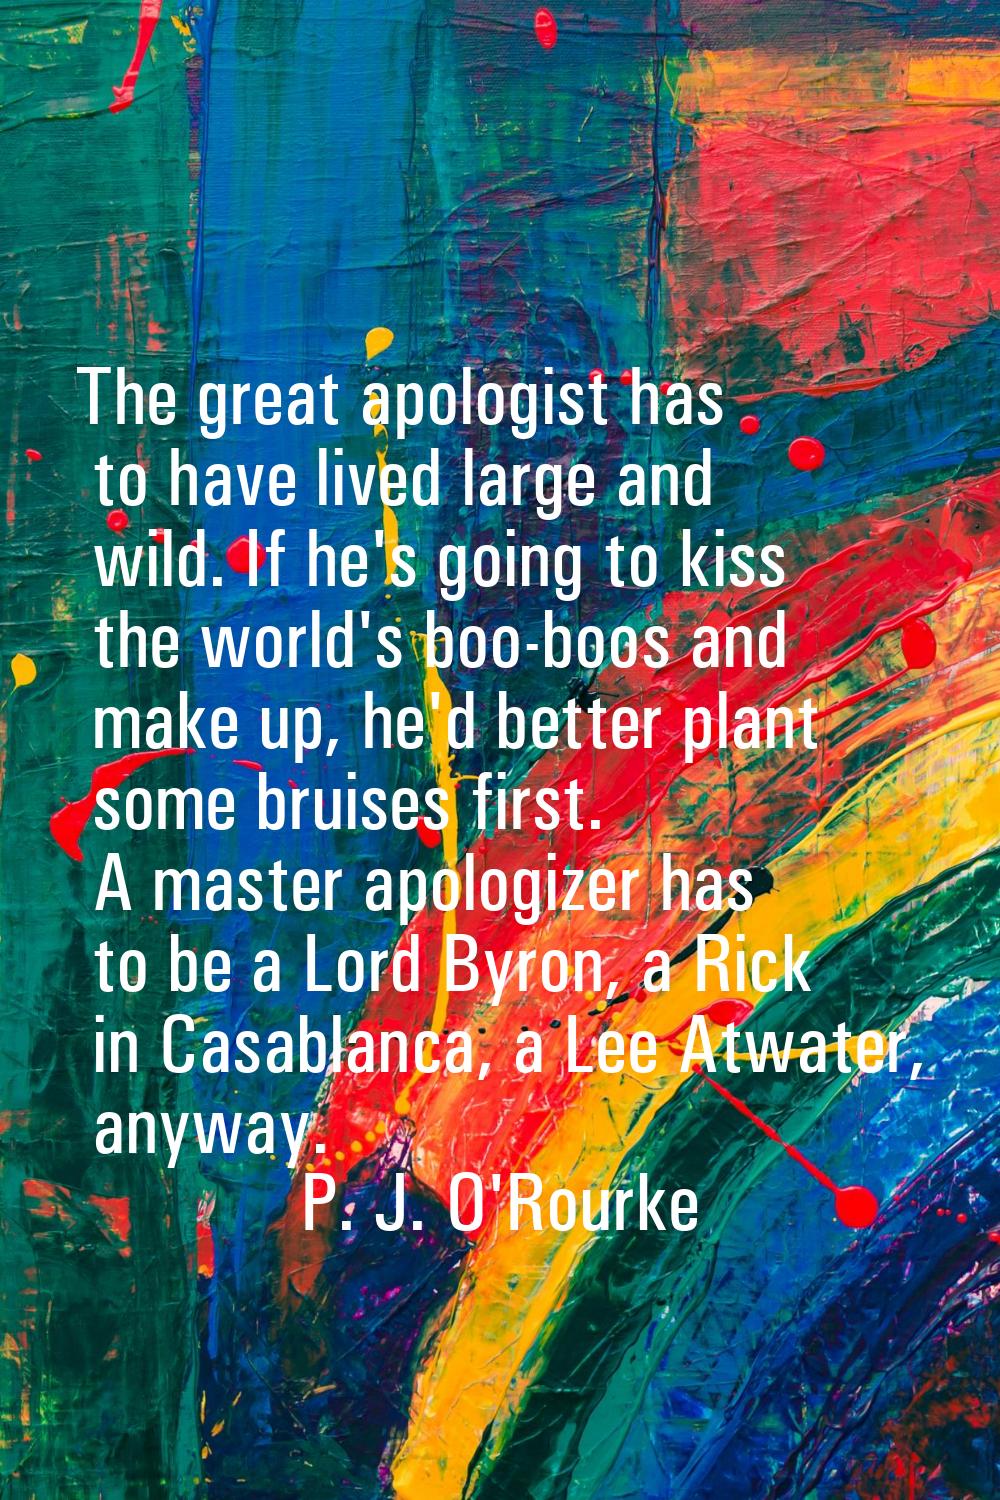 The great apologist has to have lived large and wild. If he's going to kiss the world's boo-boos an